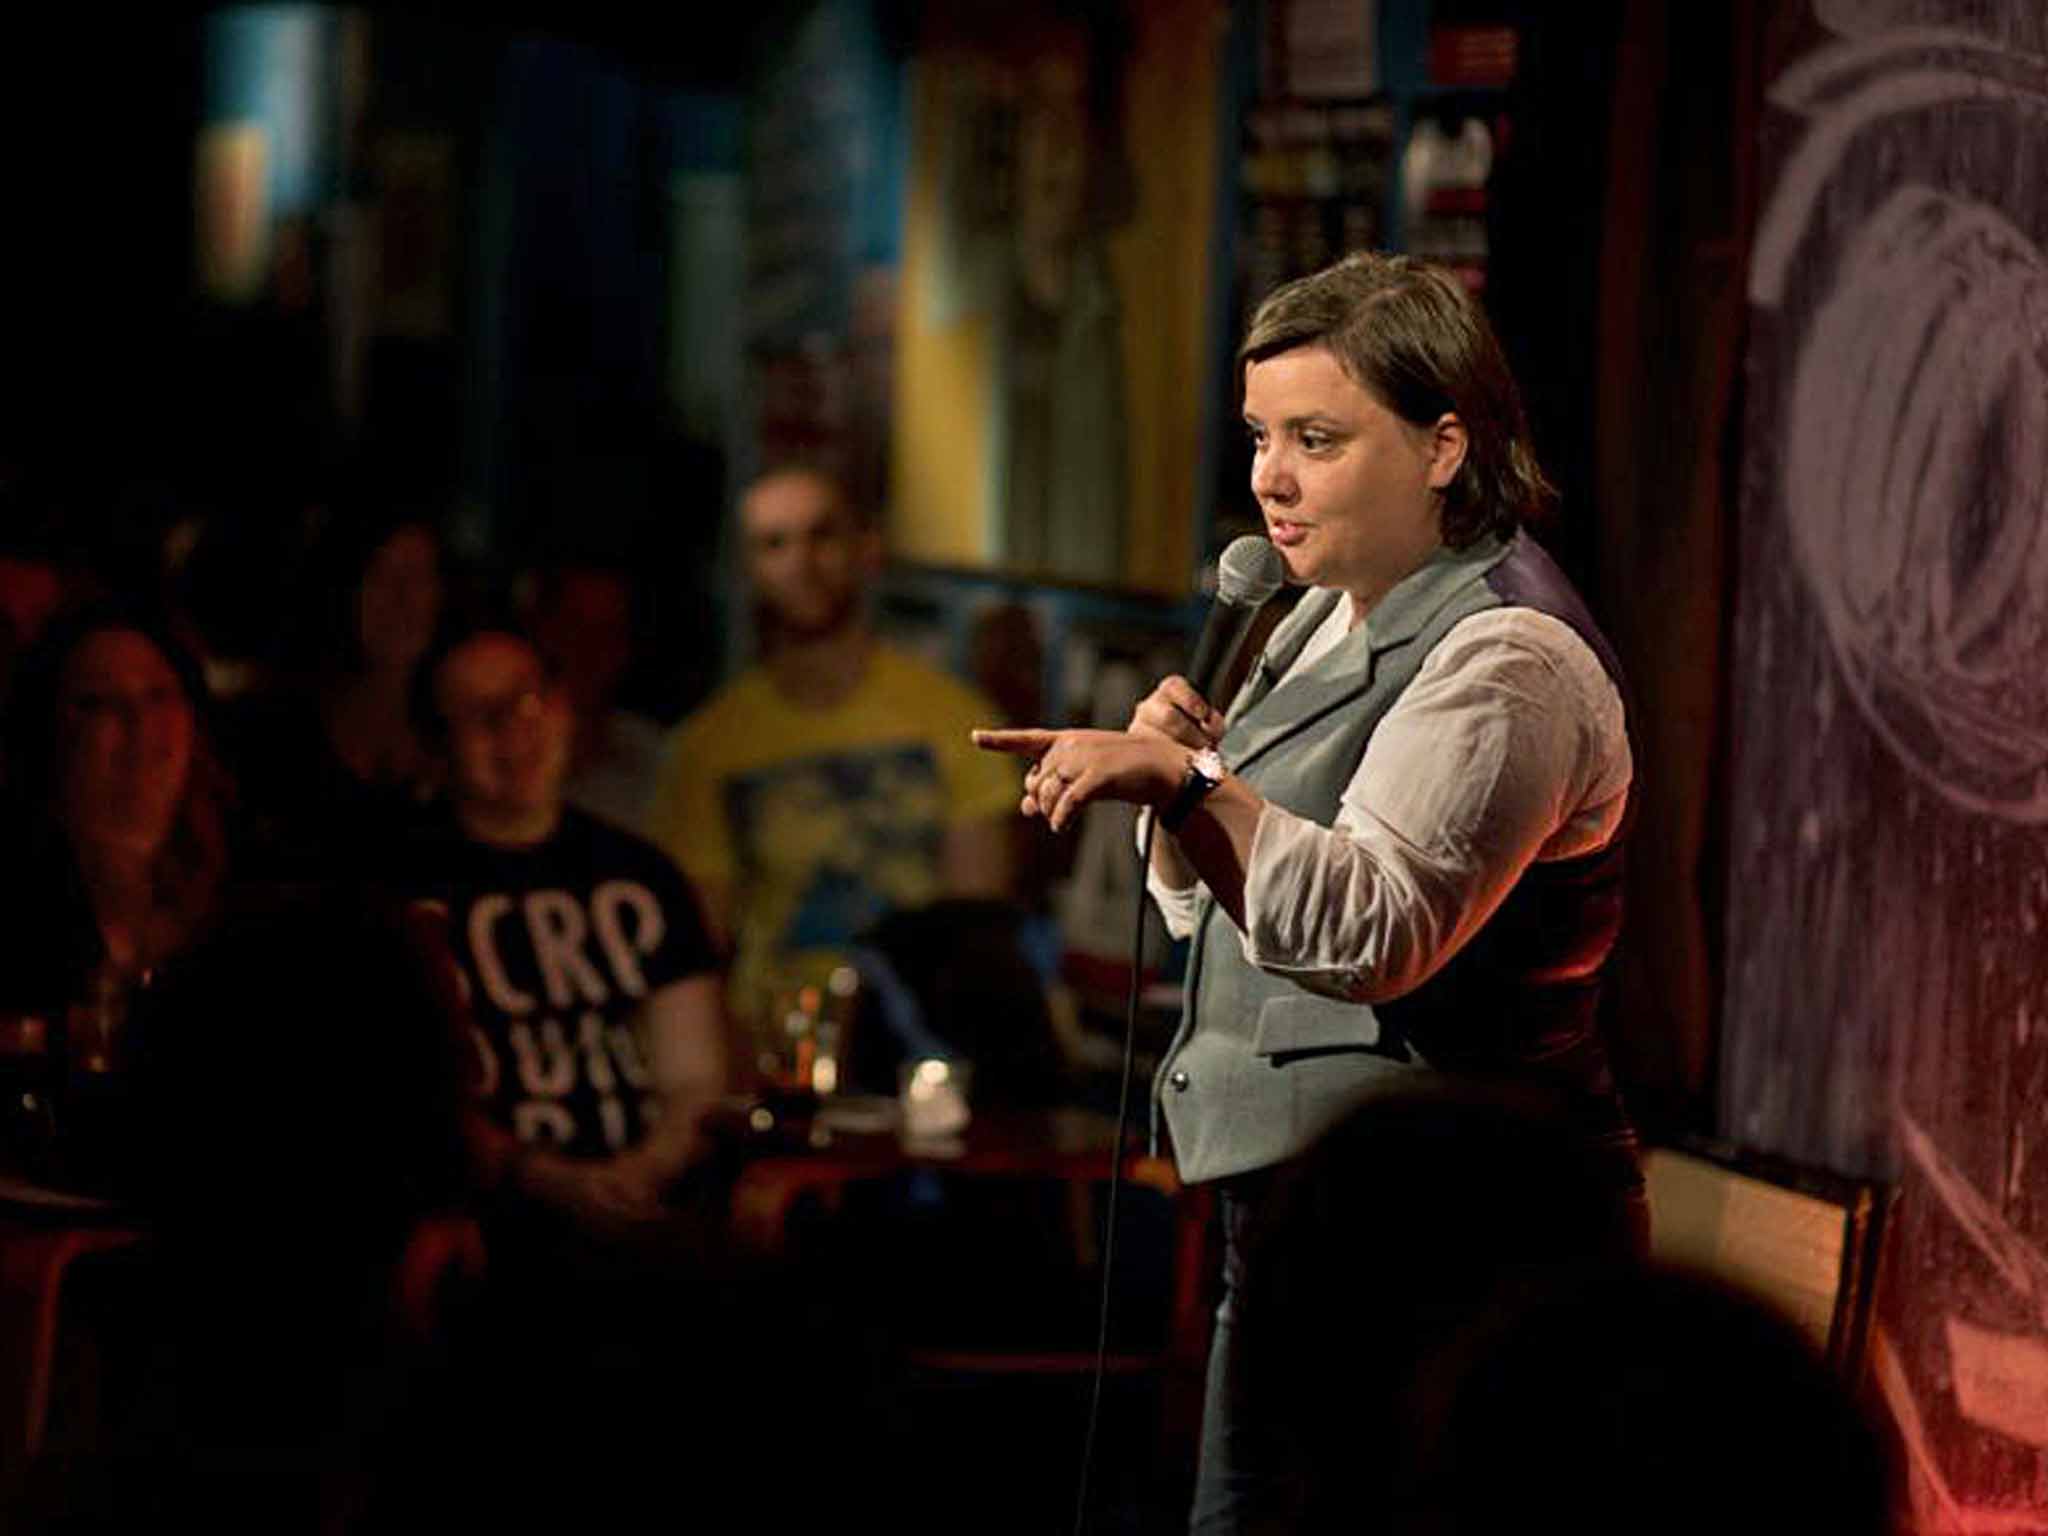 Making her point: Susan Calman in 'The Alternative Comedy Experience'